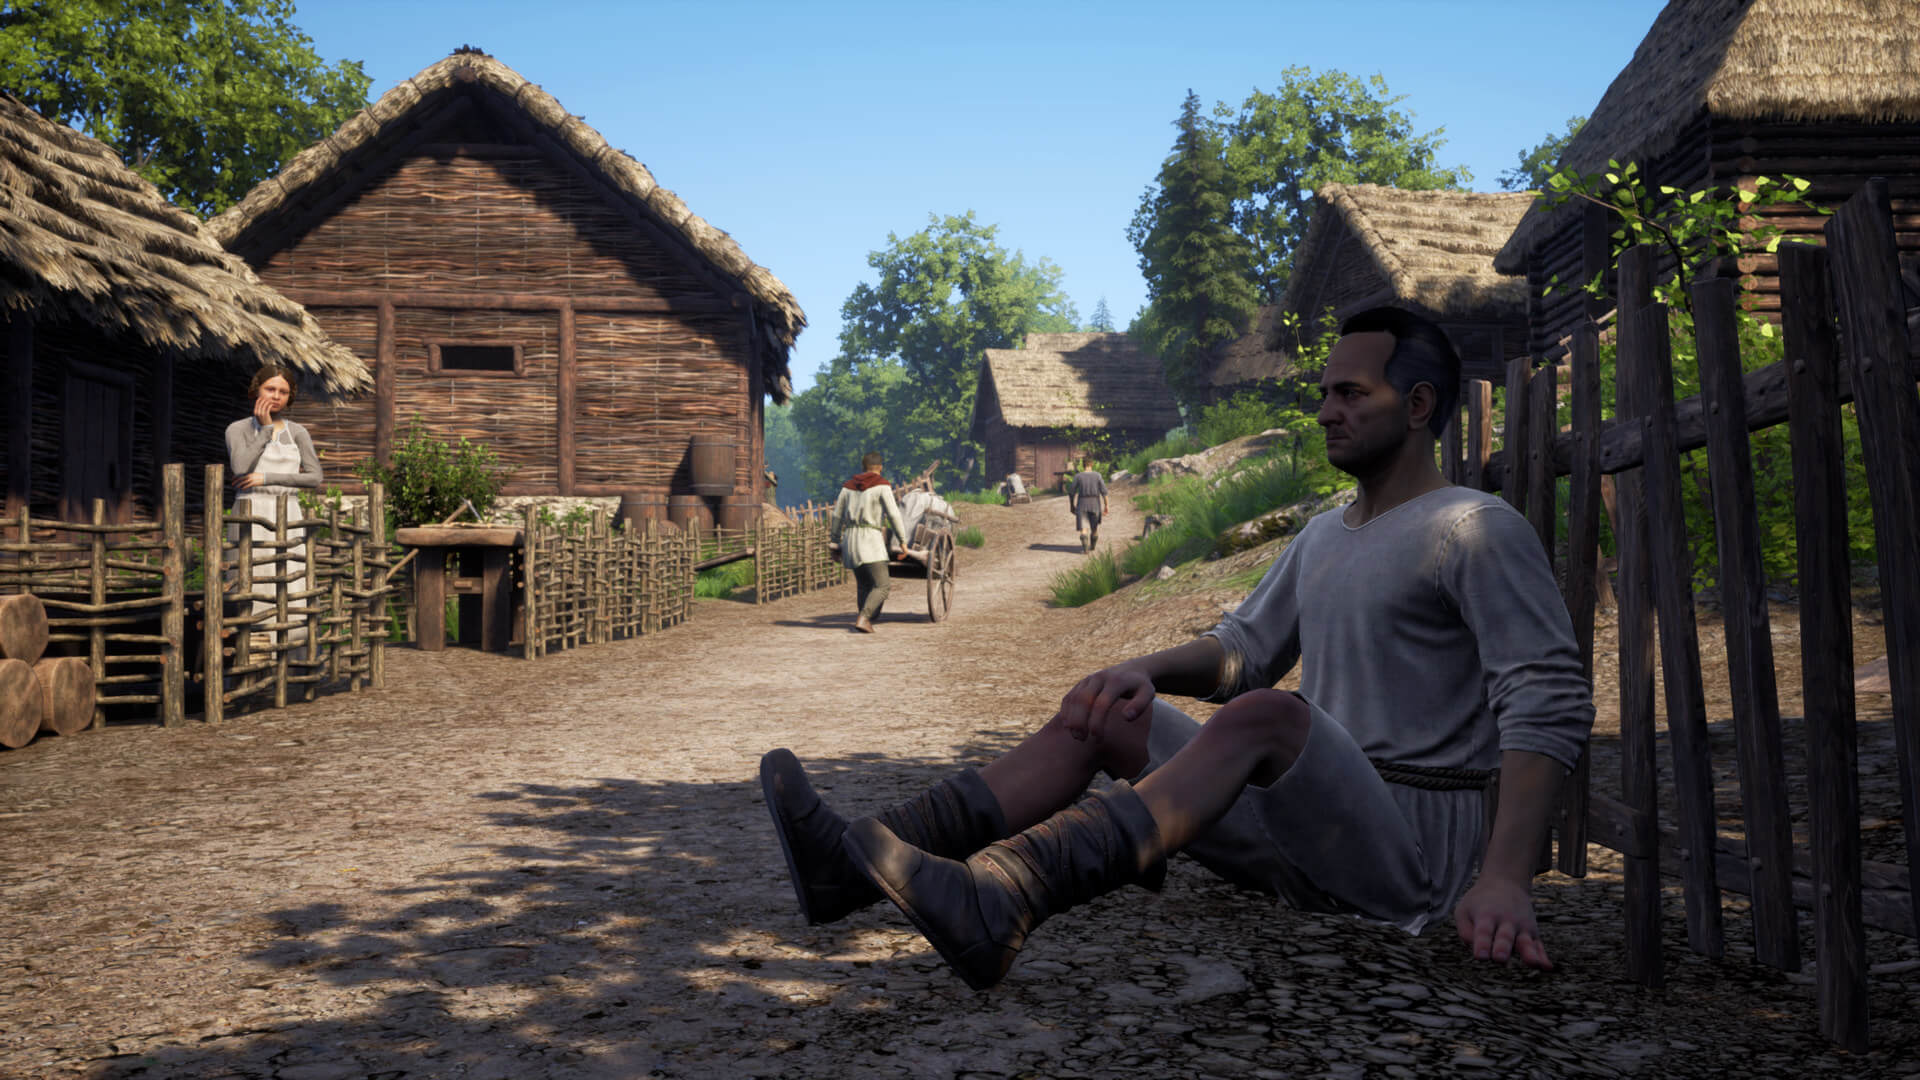 Here are some brand new screenshots from Medieval Dynasty